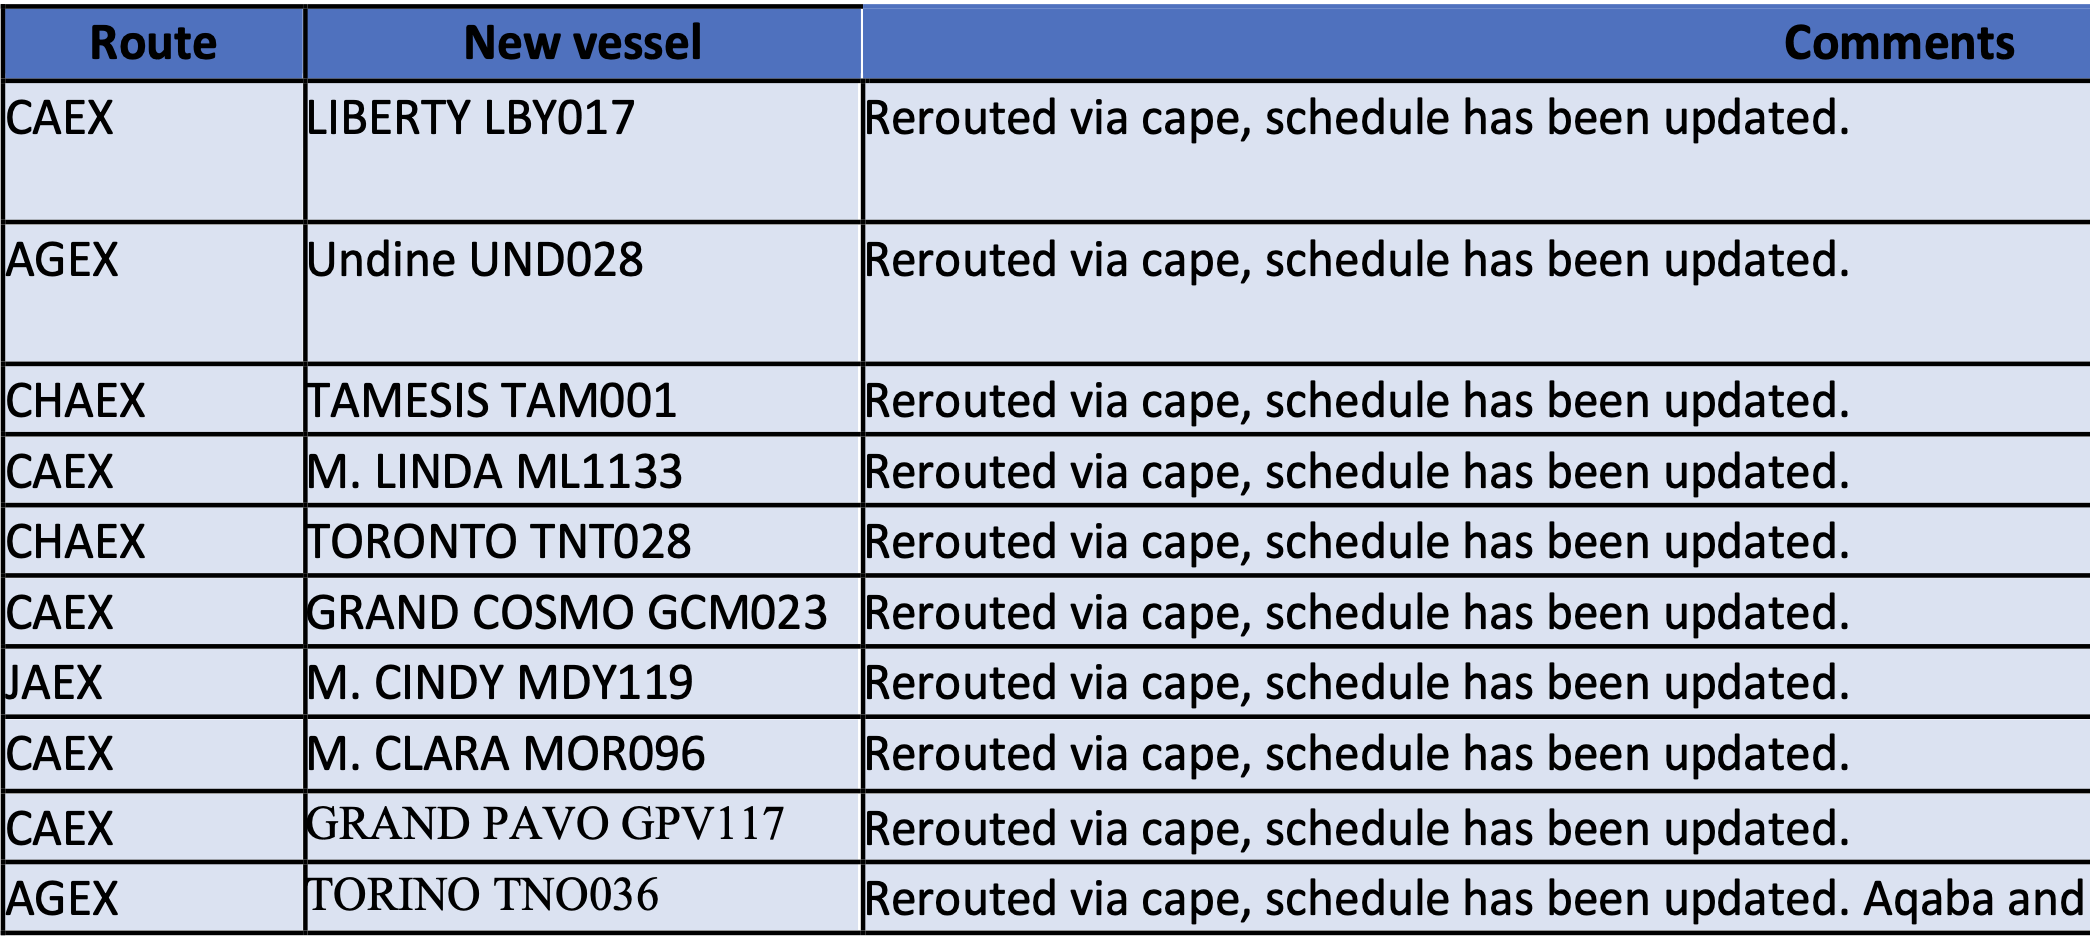 Freightplus shipments affected by the rerouting from the Suez Canal to thr Cape of Good Hope